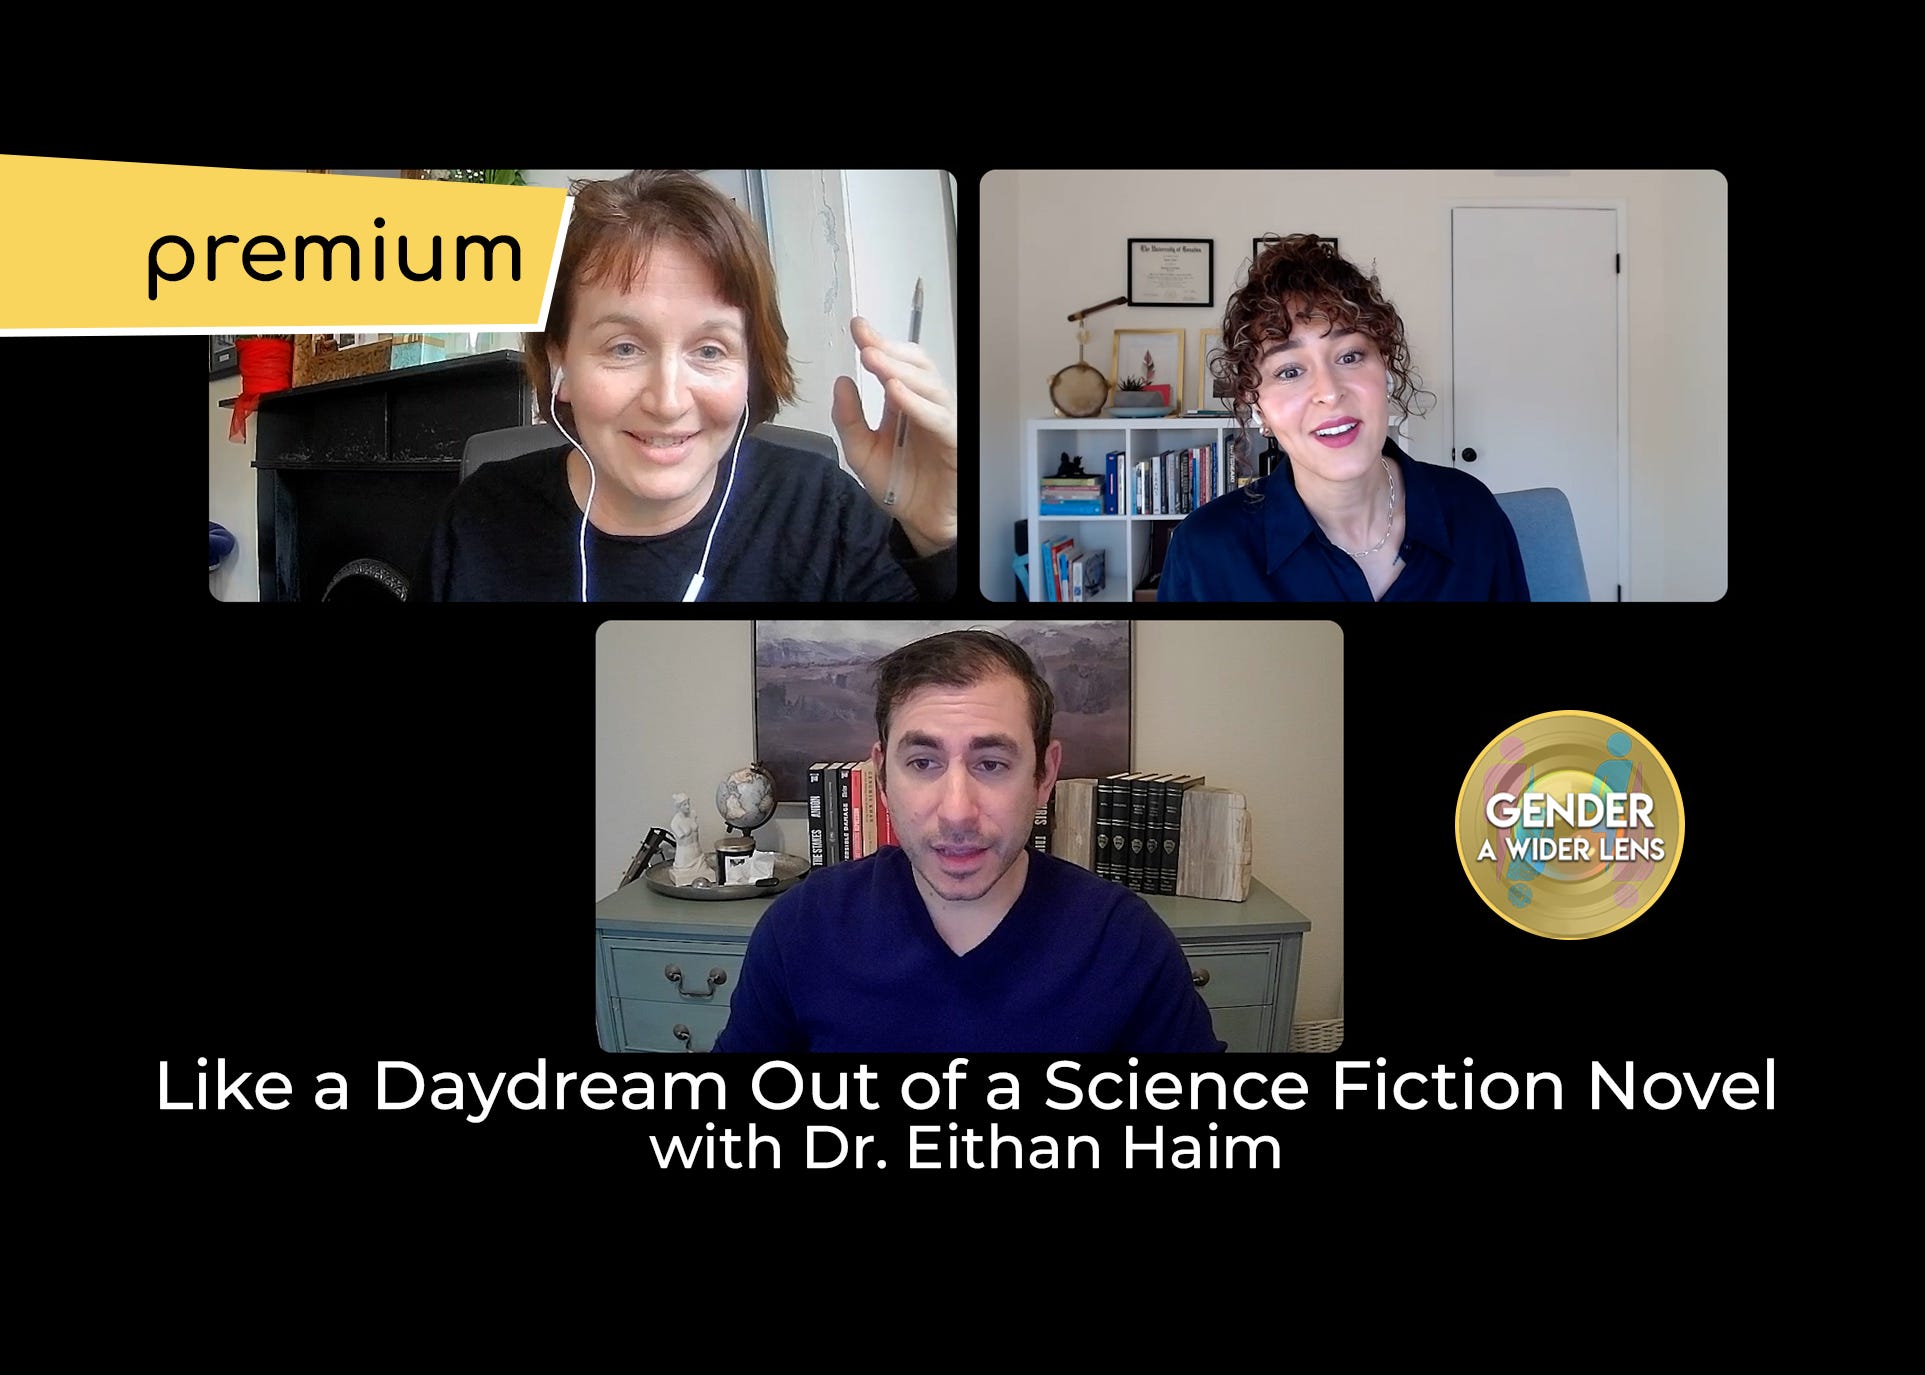 Premium: Like a Daydream Out of a Science Fiction Novel